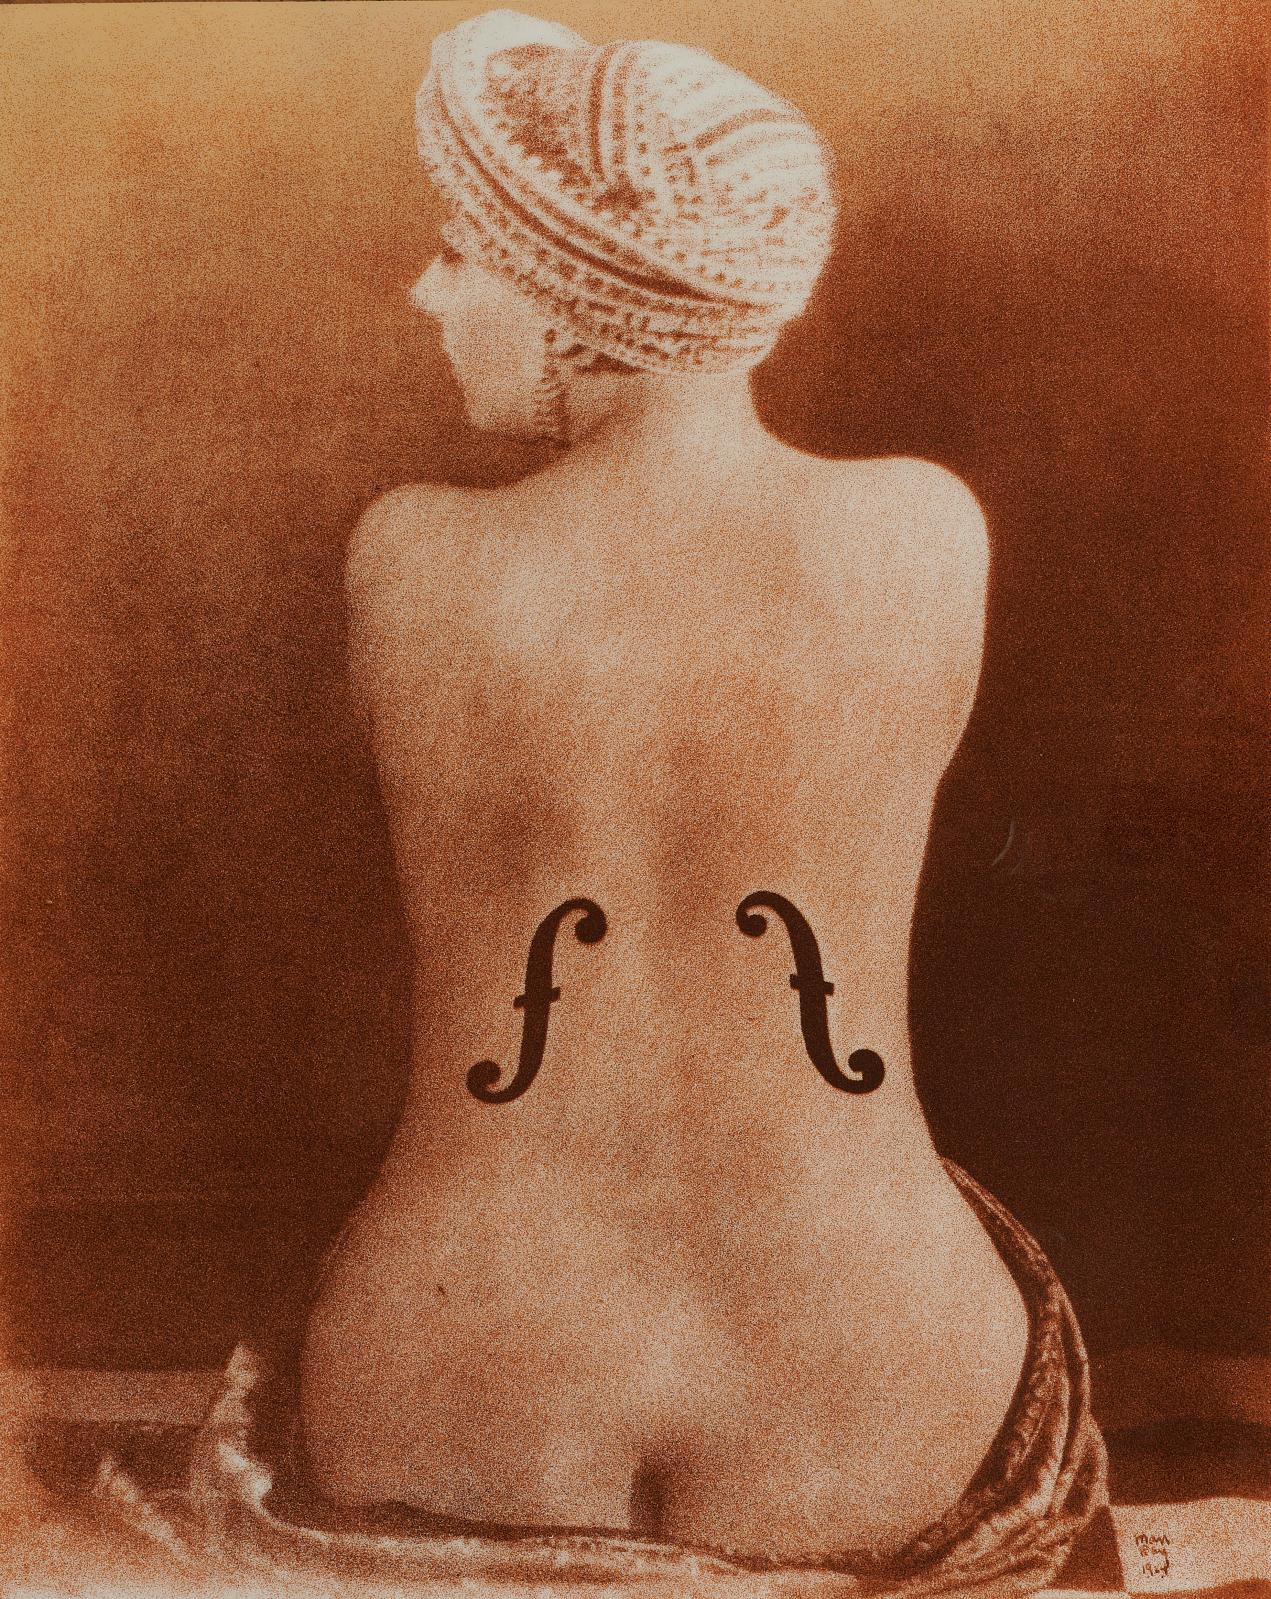 Man Ray, Le violon d'Ingres, 1924, unique triptych, c. 1970, three silkscreens on plastic, one in black and white, one in blue and one in 